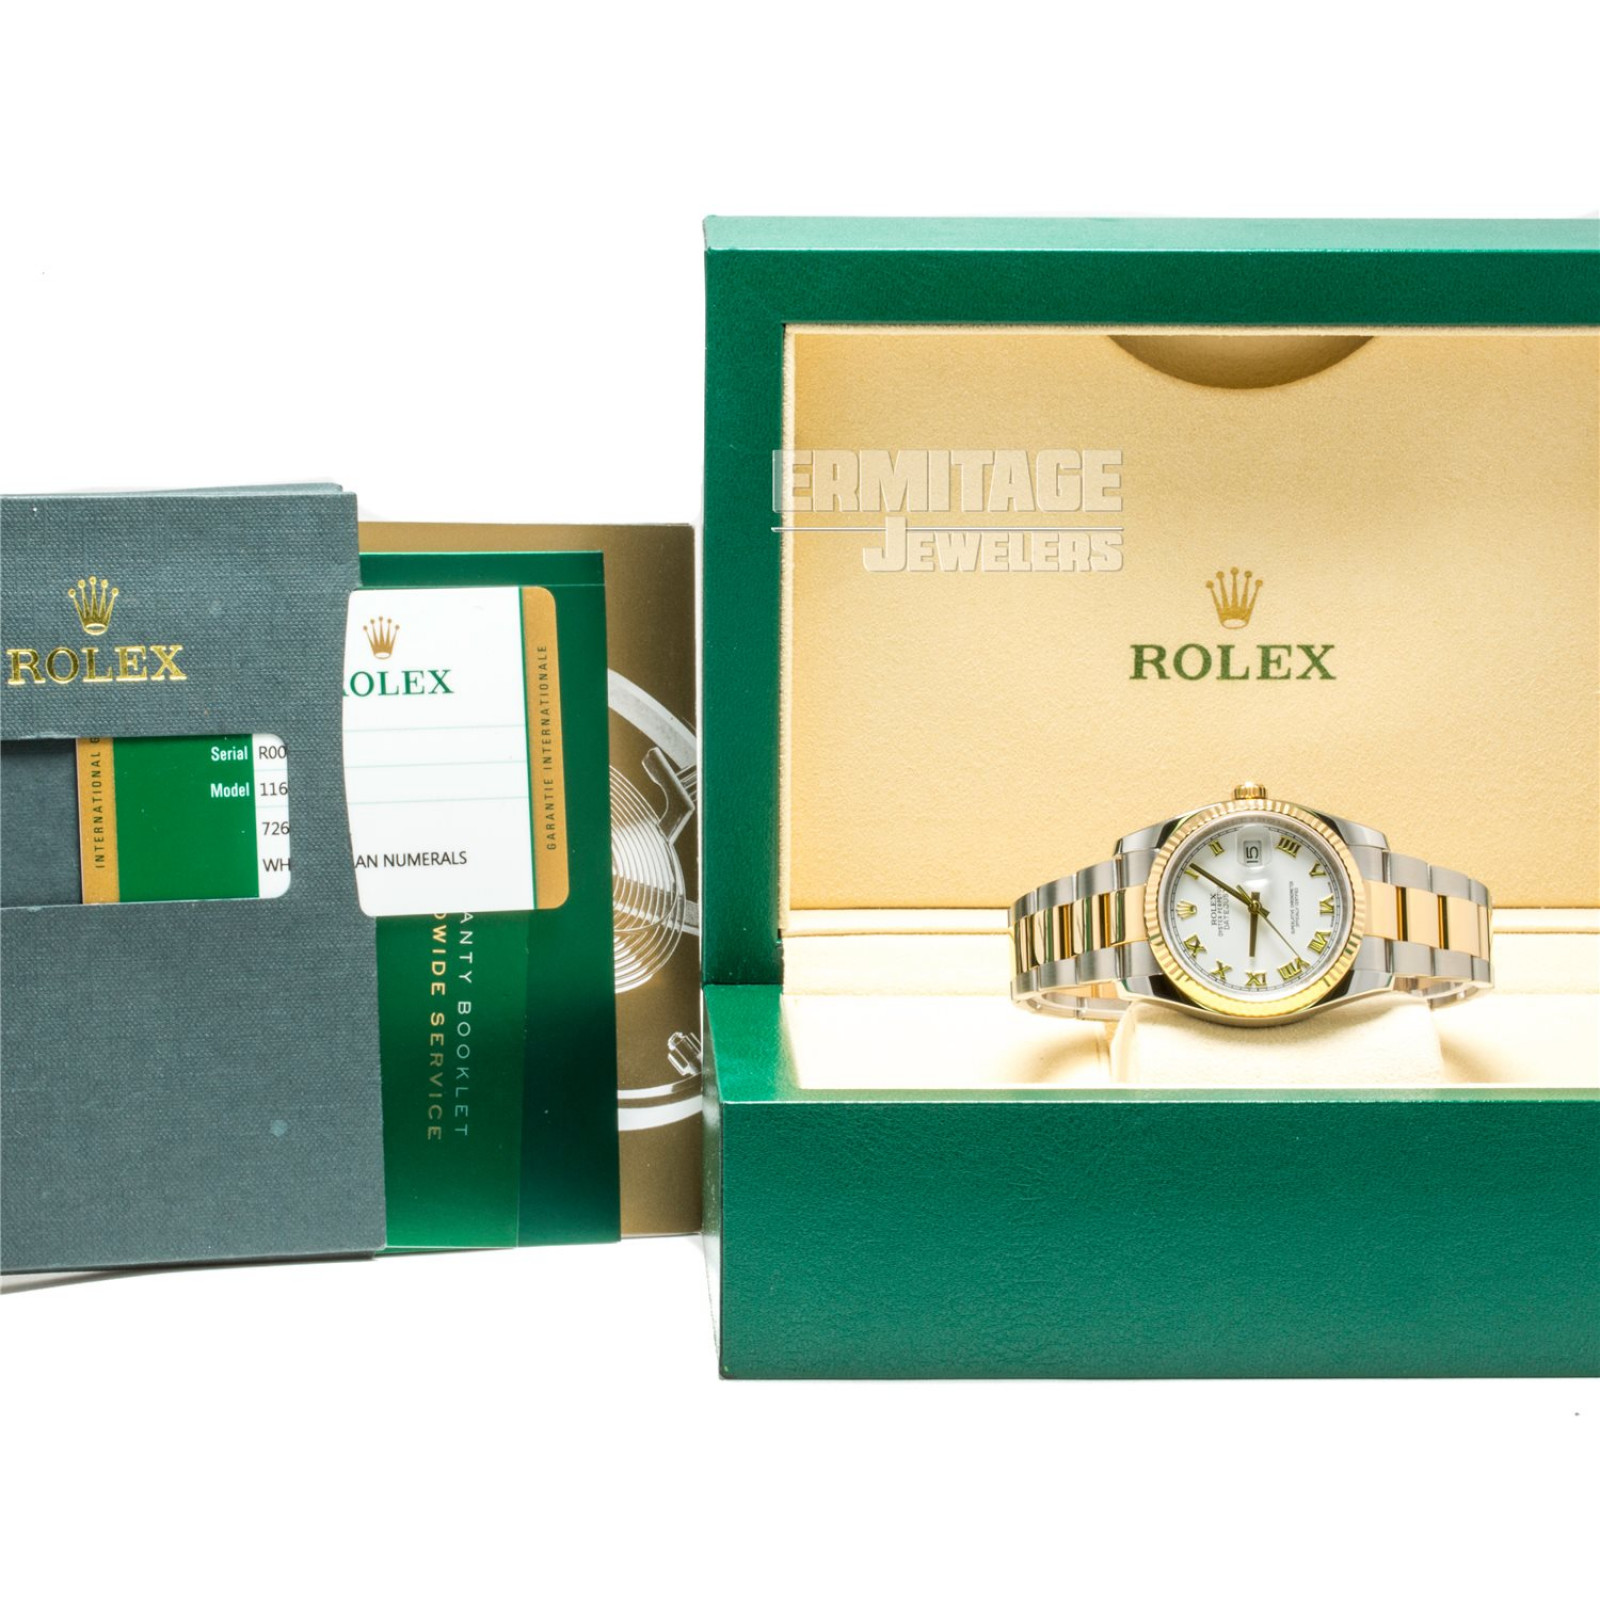 Gold & Steel on Oyster Rolex Datejust 116233 36 mm